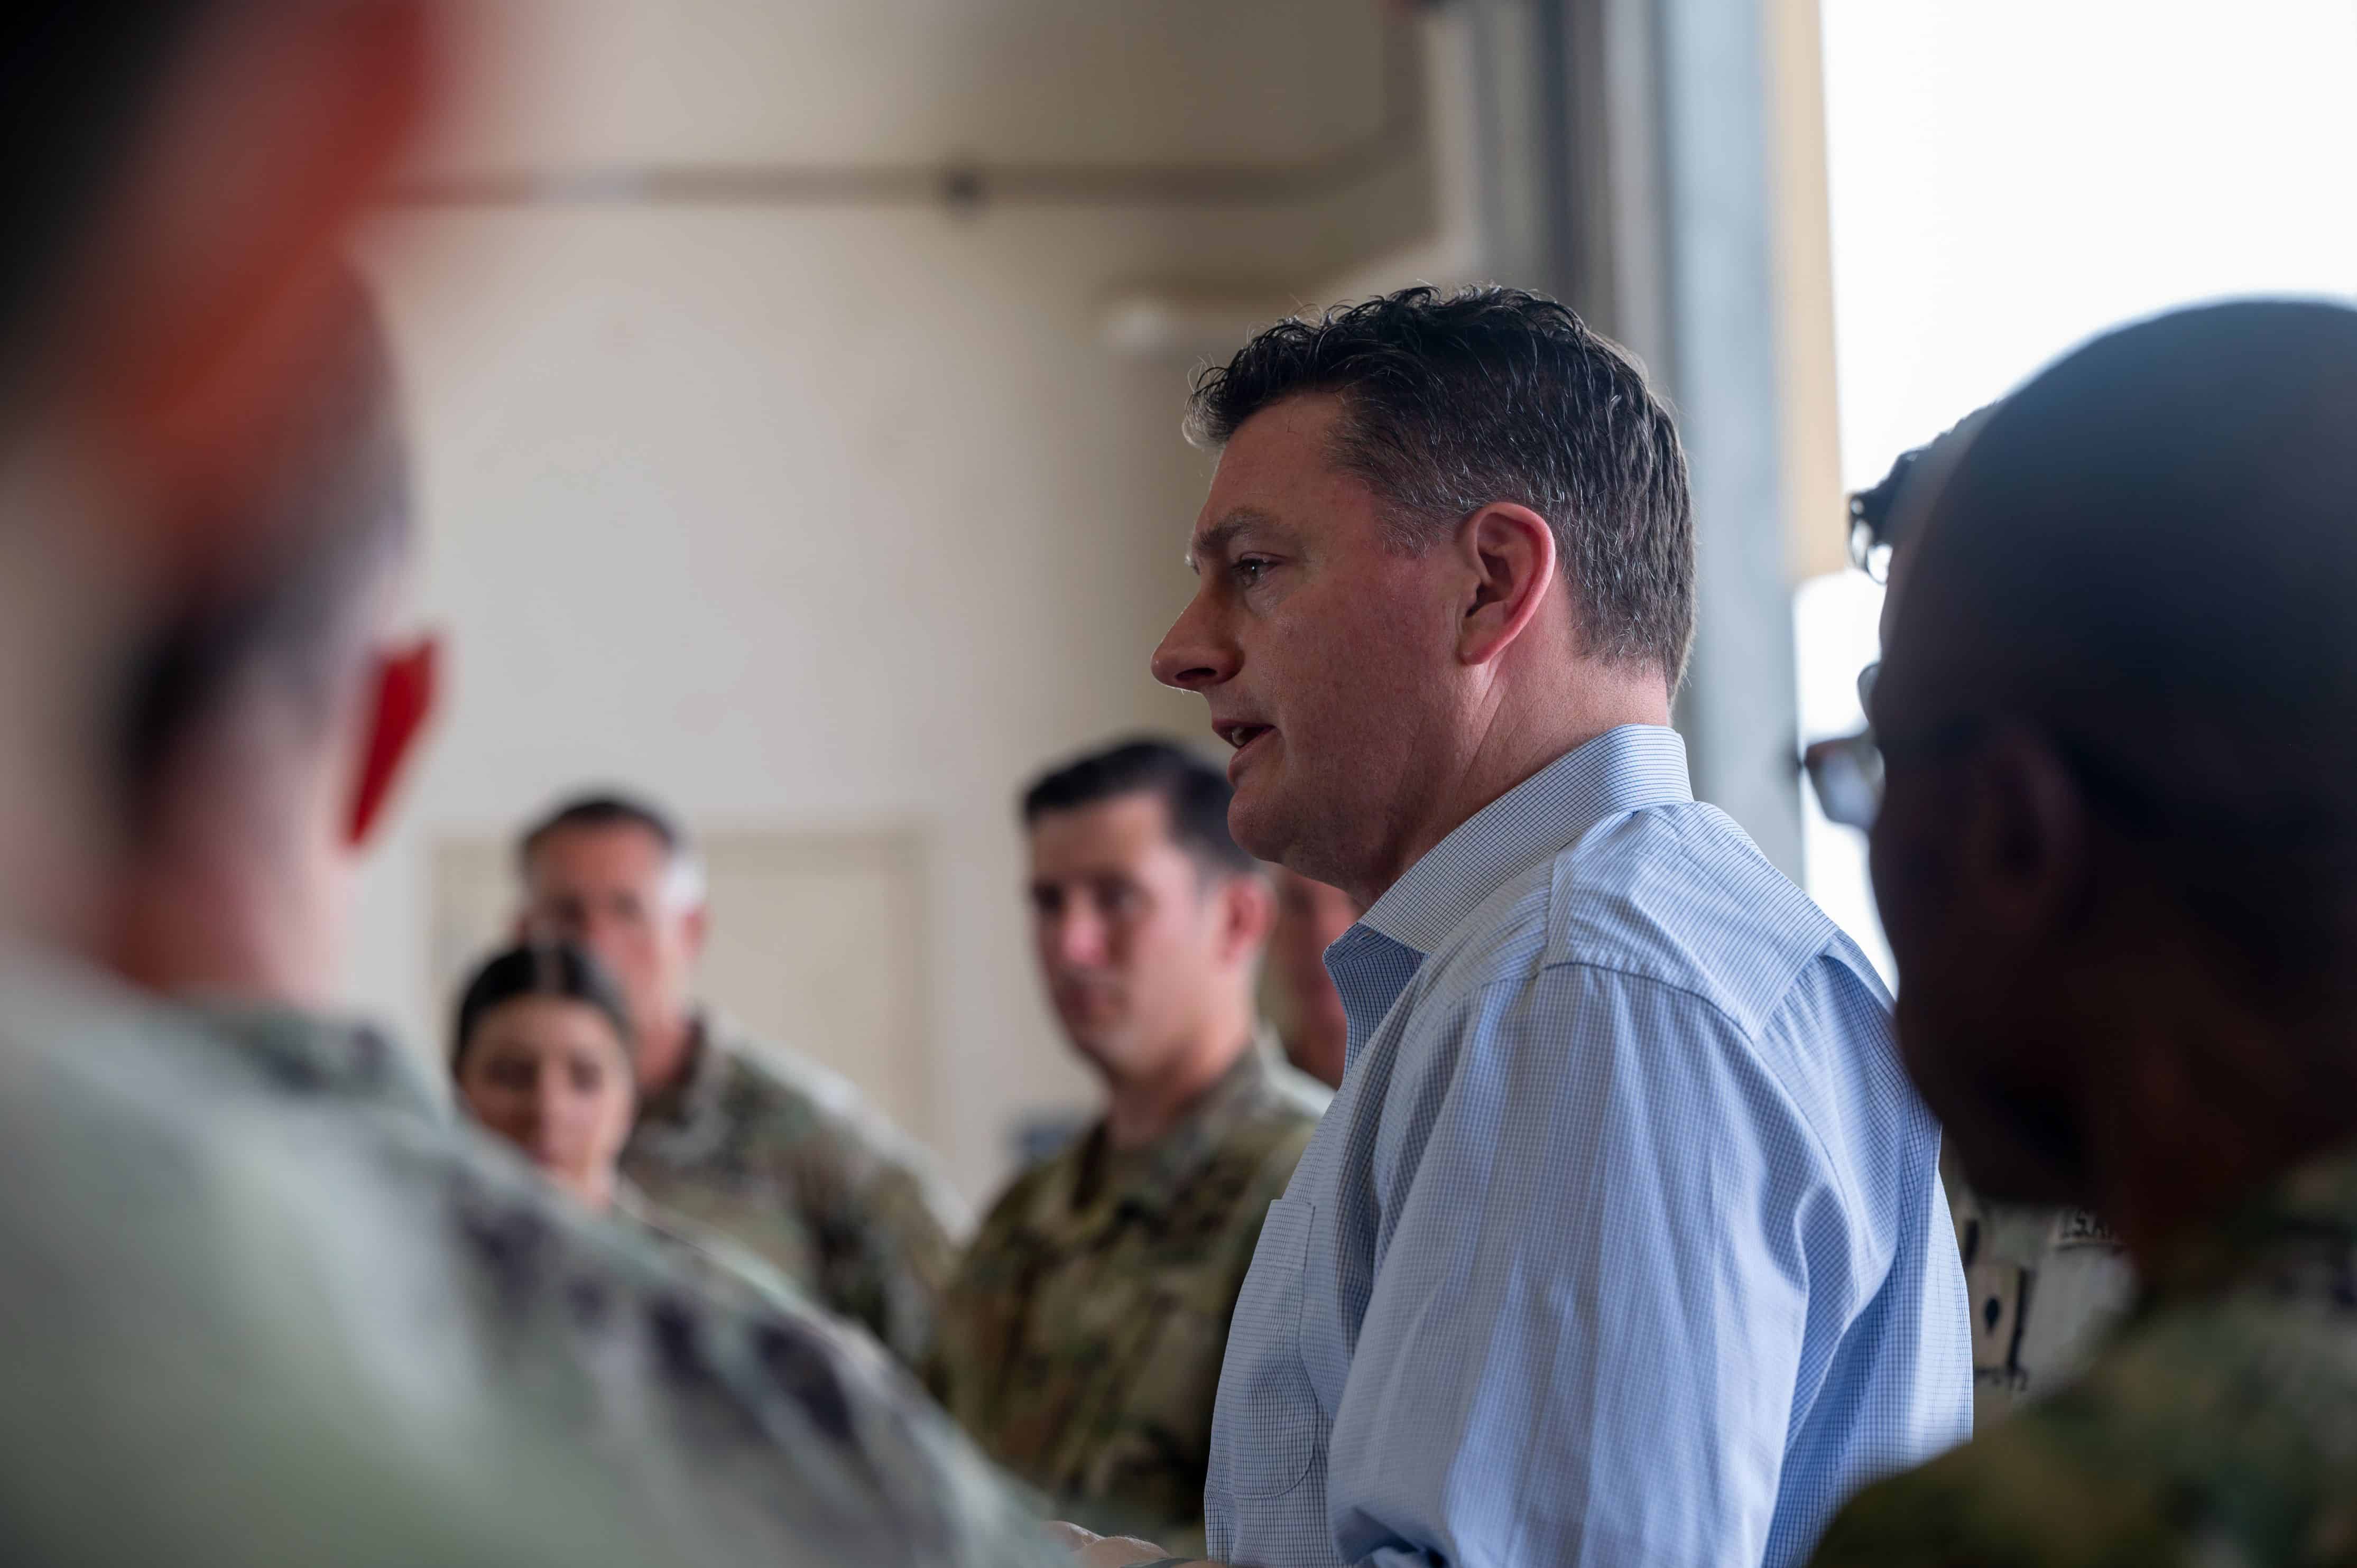 The Honorable Christopher P. Maier, the Assistant Secretary of Defense for Special Operations and Low-Intensity Conflict, speaks with U.S. Special Operations Command Africa troops at Camp Lemonnier, Djibouti, July 23, 2023. Maier met with U.S. Special Operations Command Africa to assess ongoing operations and discuss future regional security efforts. (U.S. Air Force photo by Airman 1st Class Natalie Vandergriff)